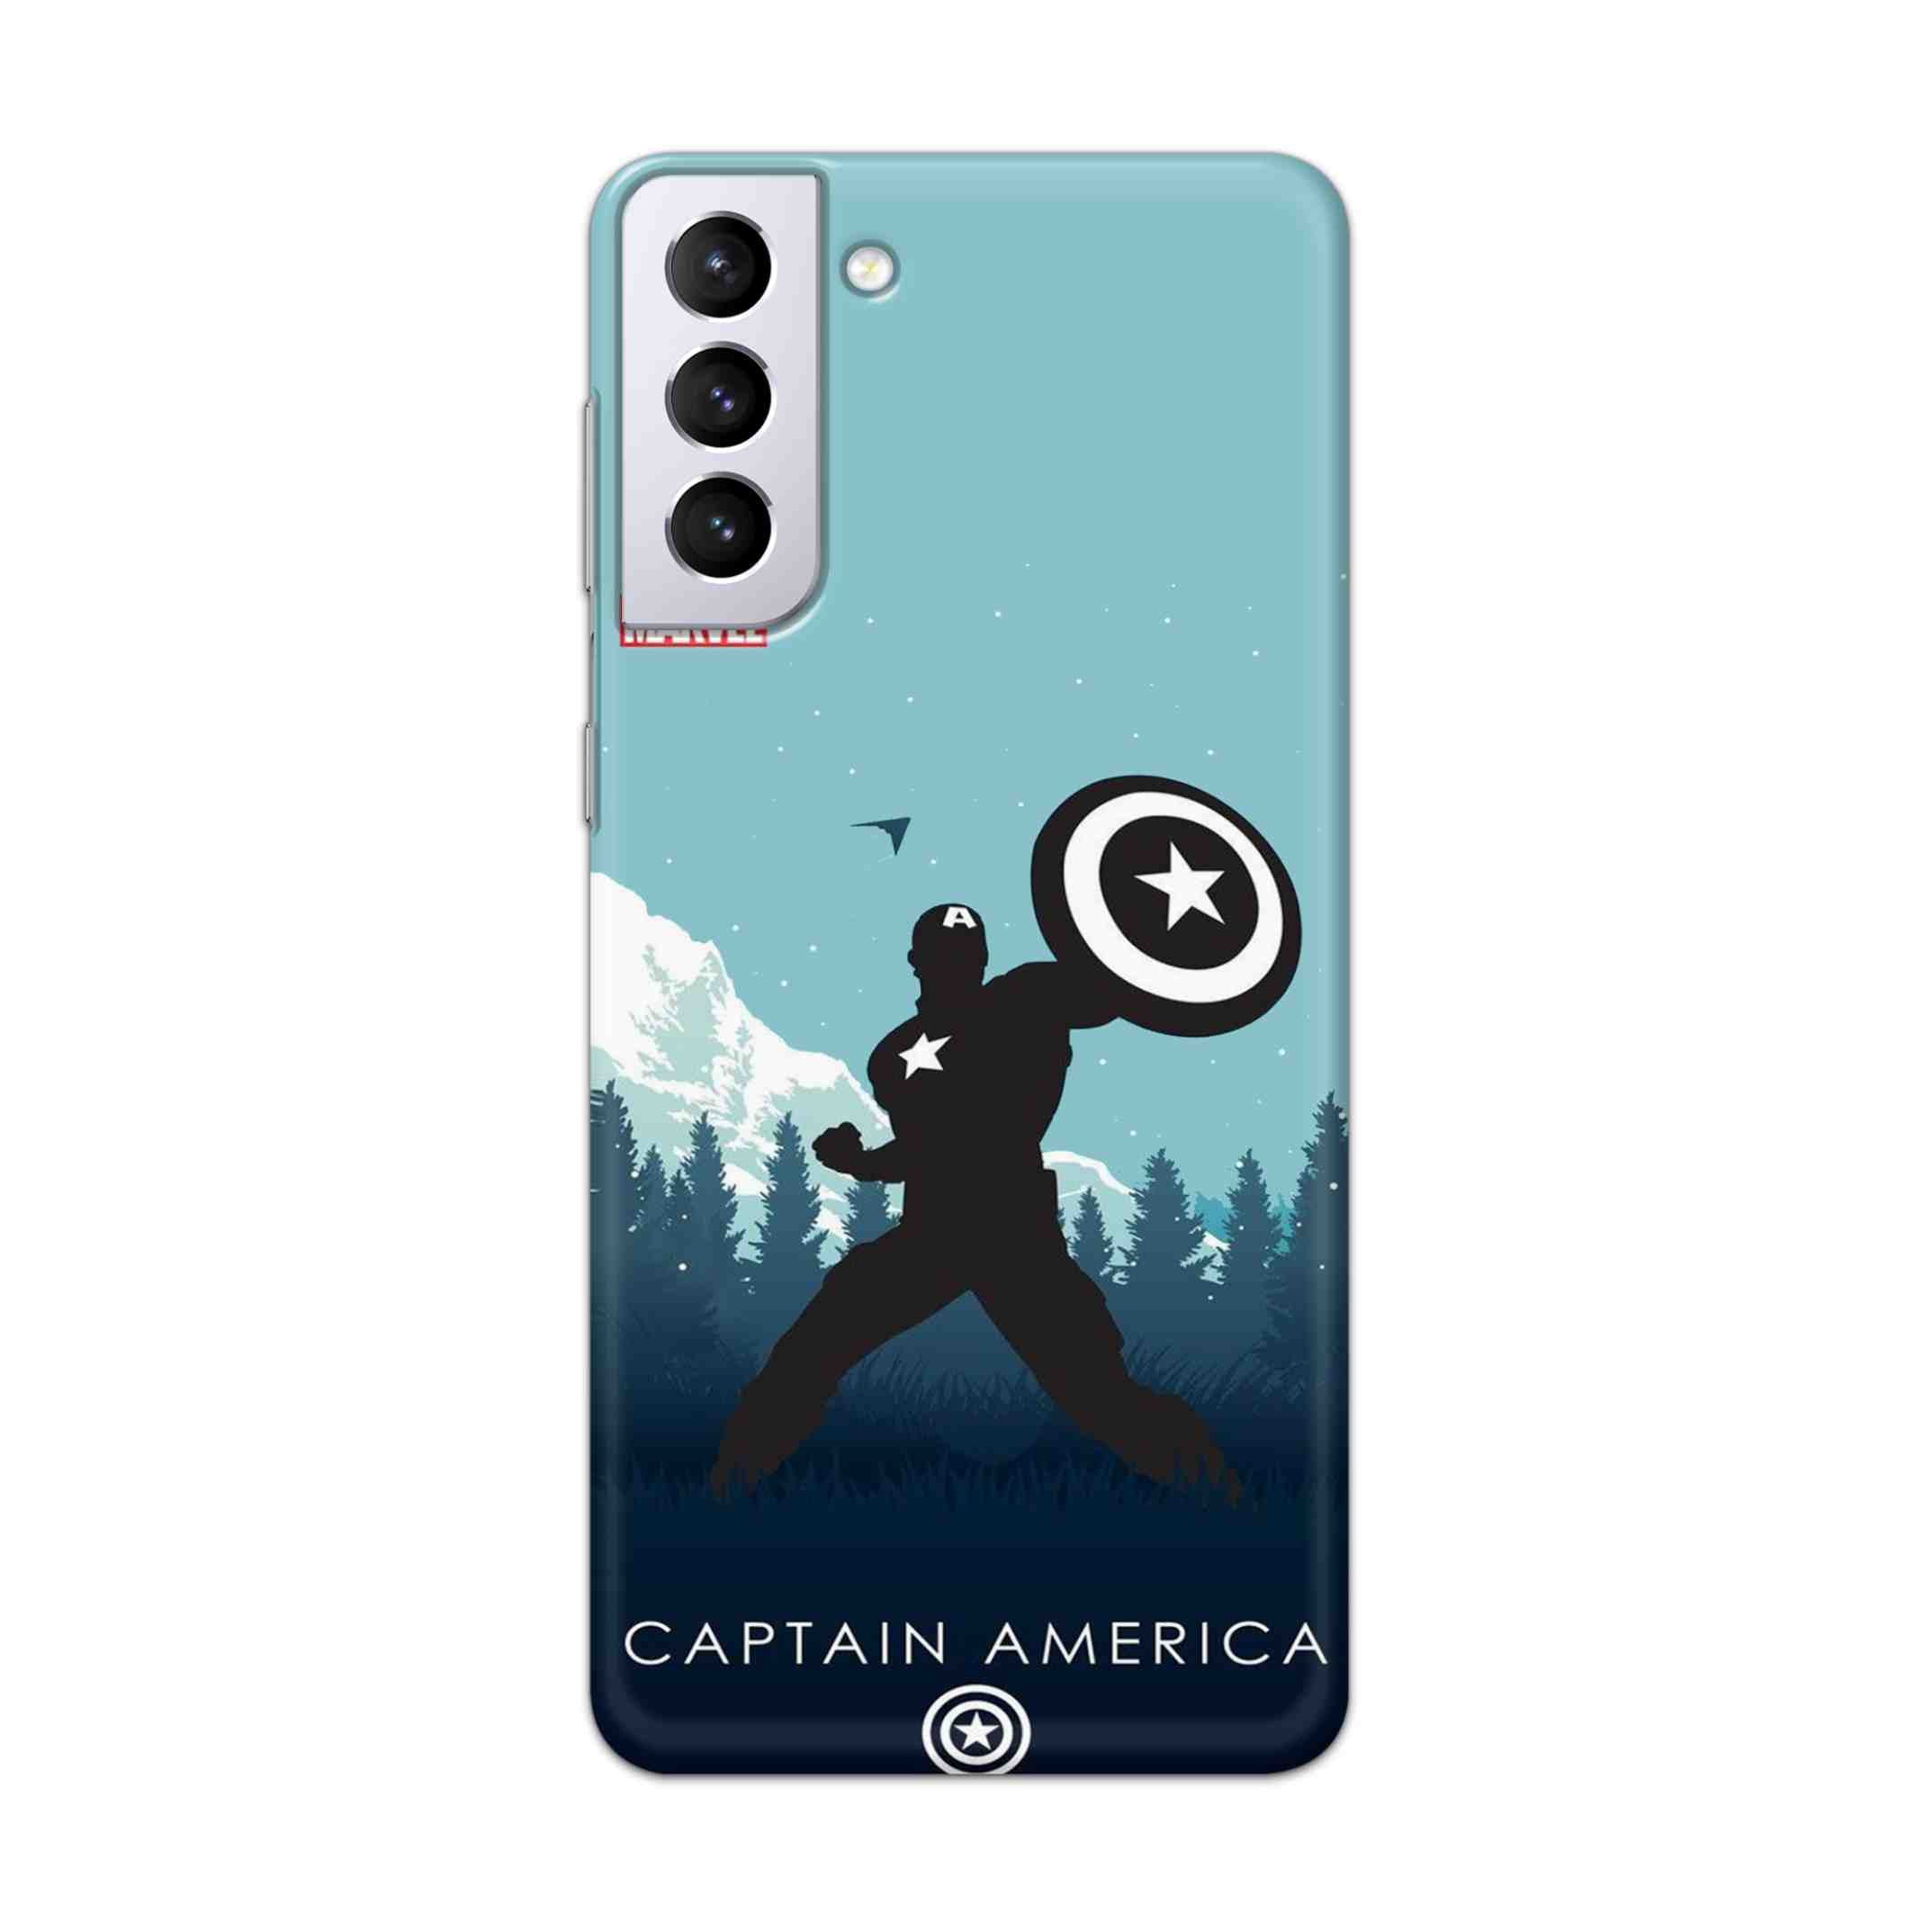 Buy Captain America Hard Back Mobile Phone Case Cover For Samsung Galaxy S21 Plus Online